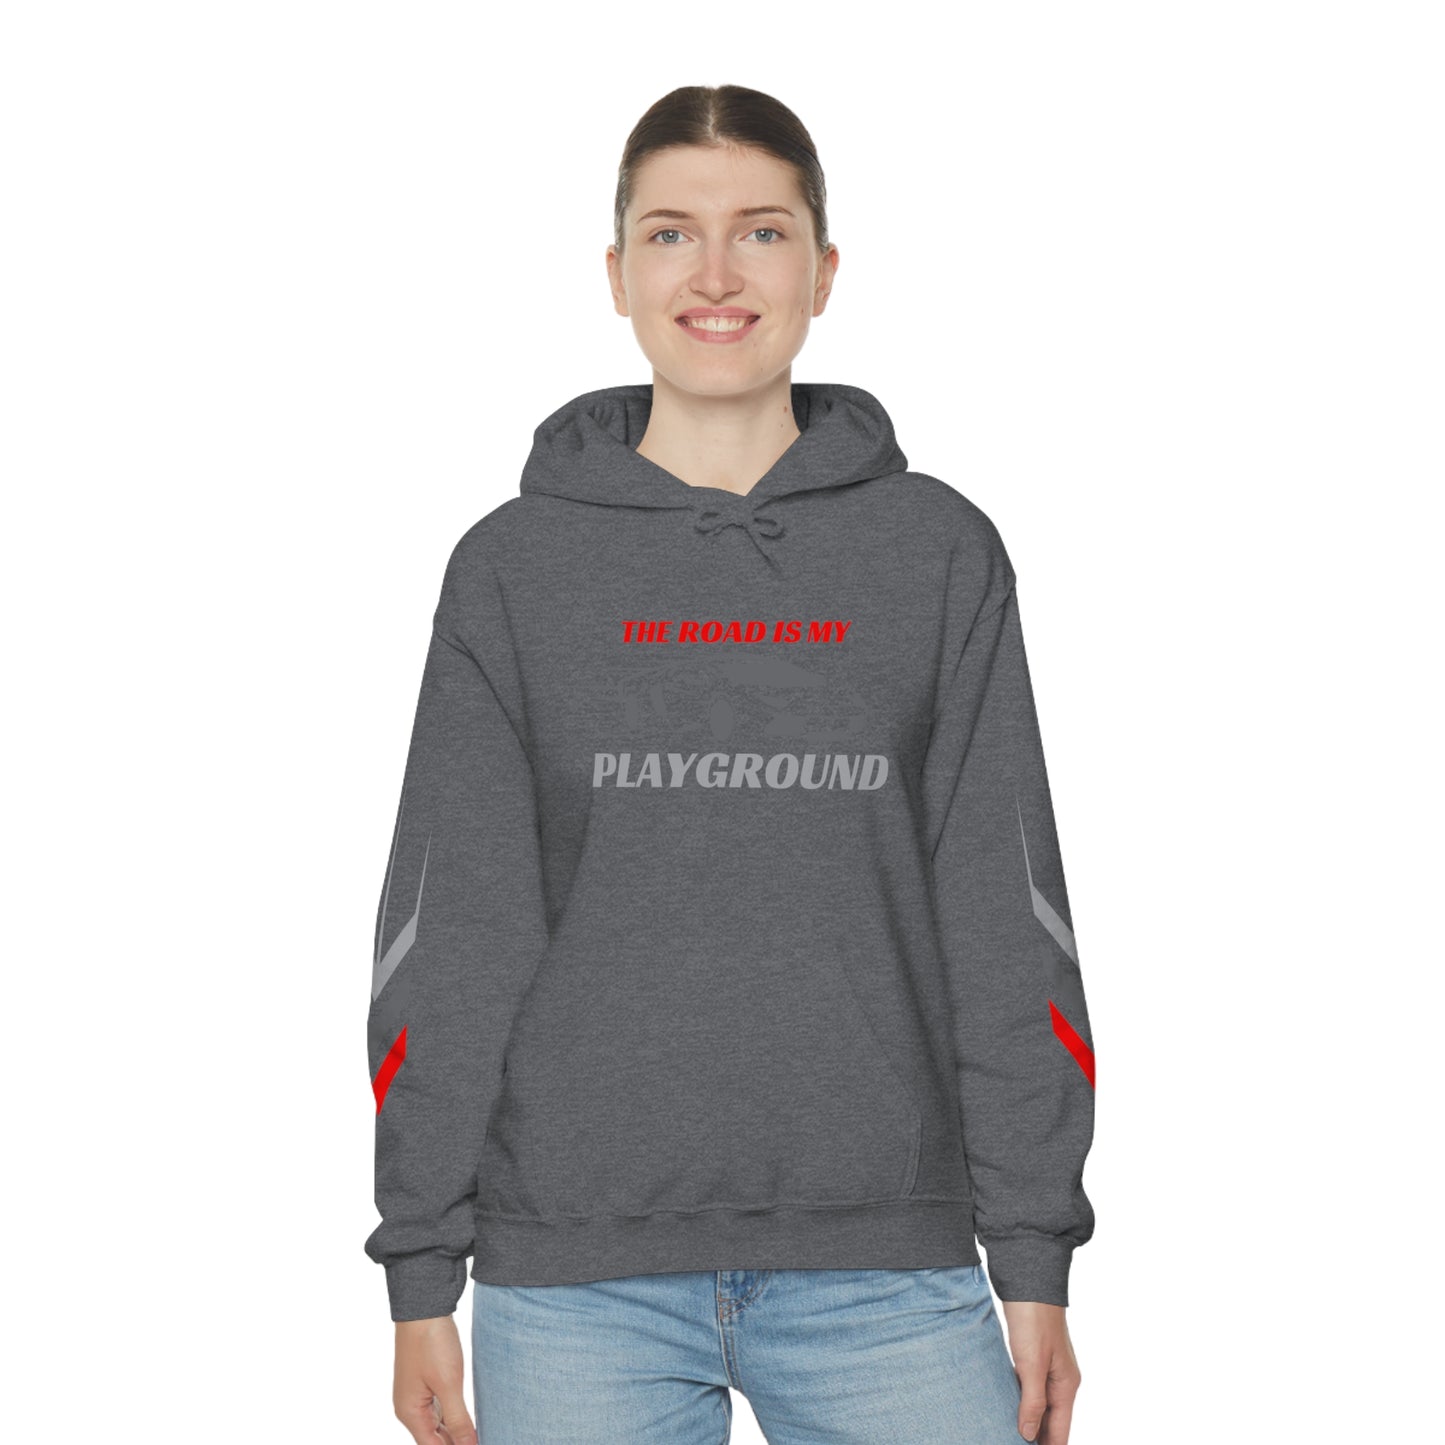 Unisex Hoodie - The Road Is My Playground